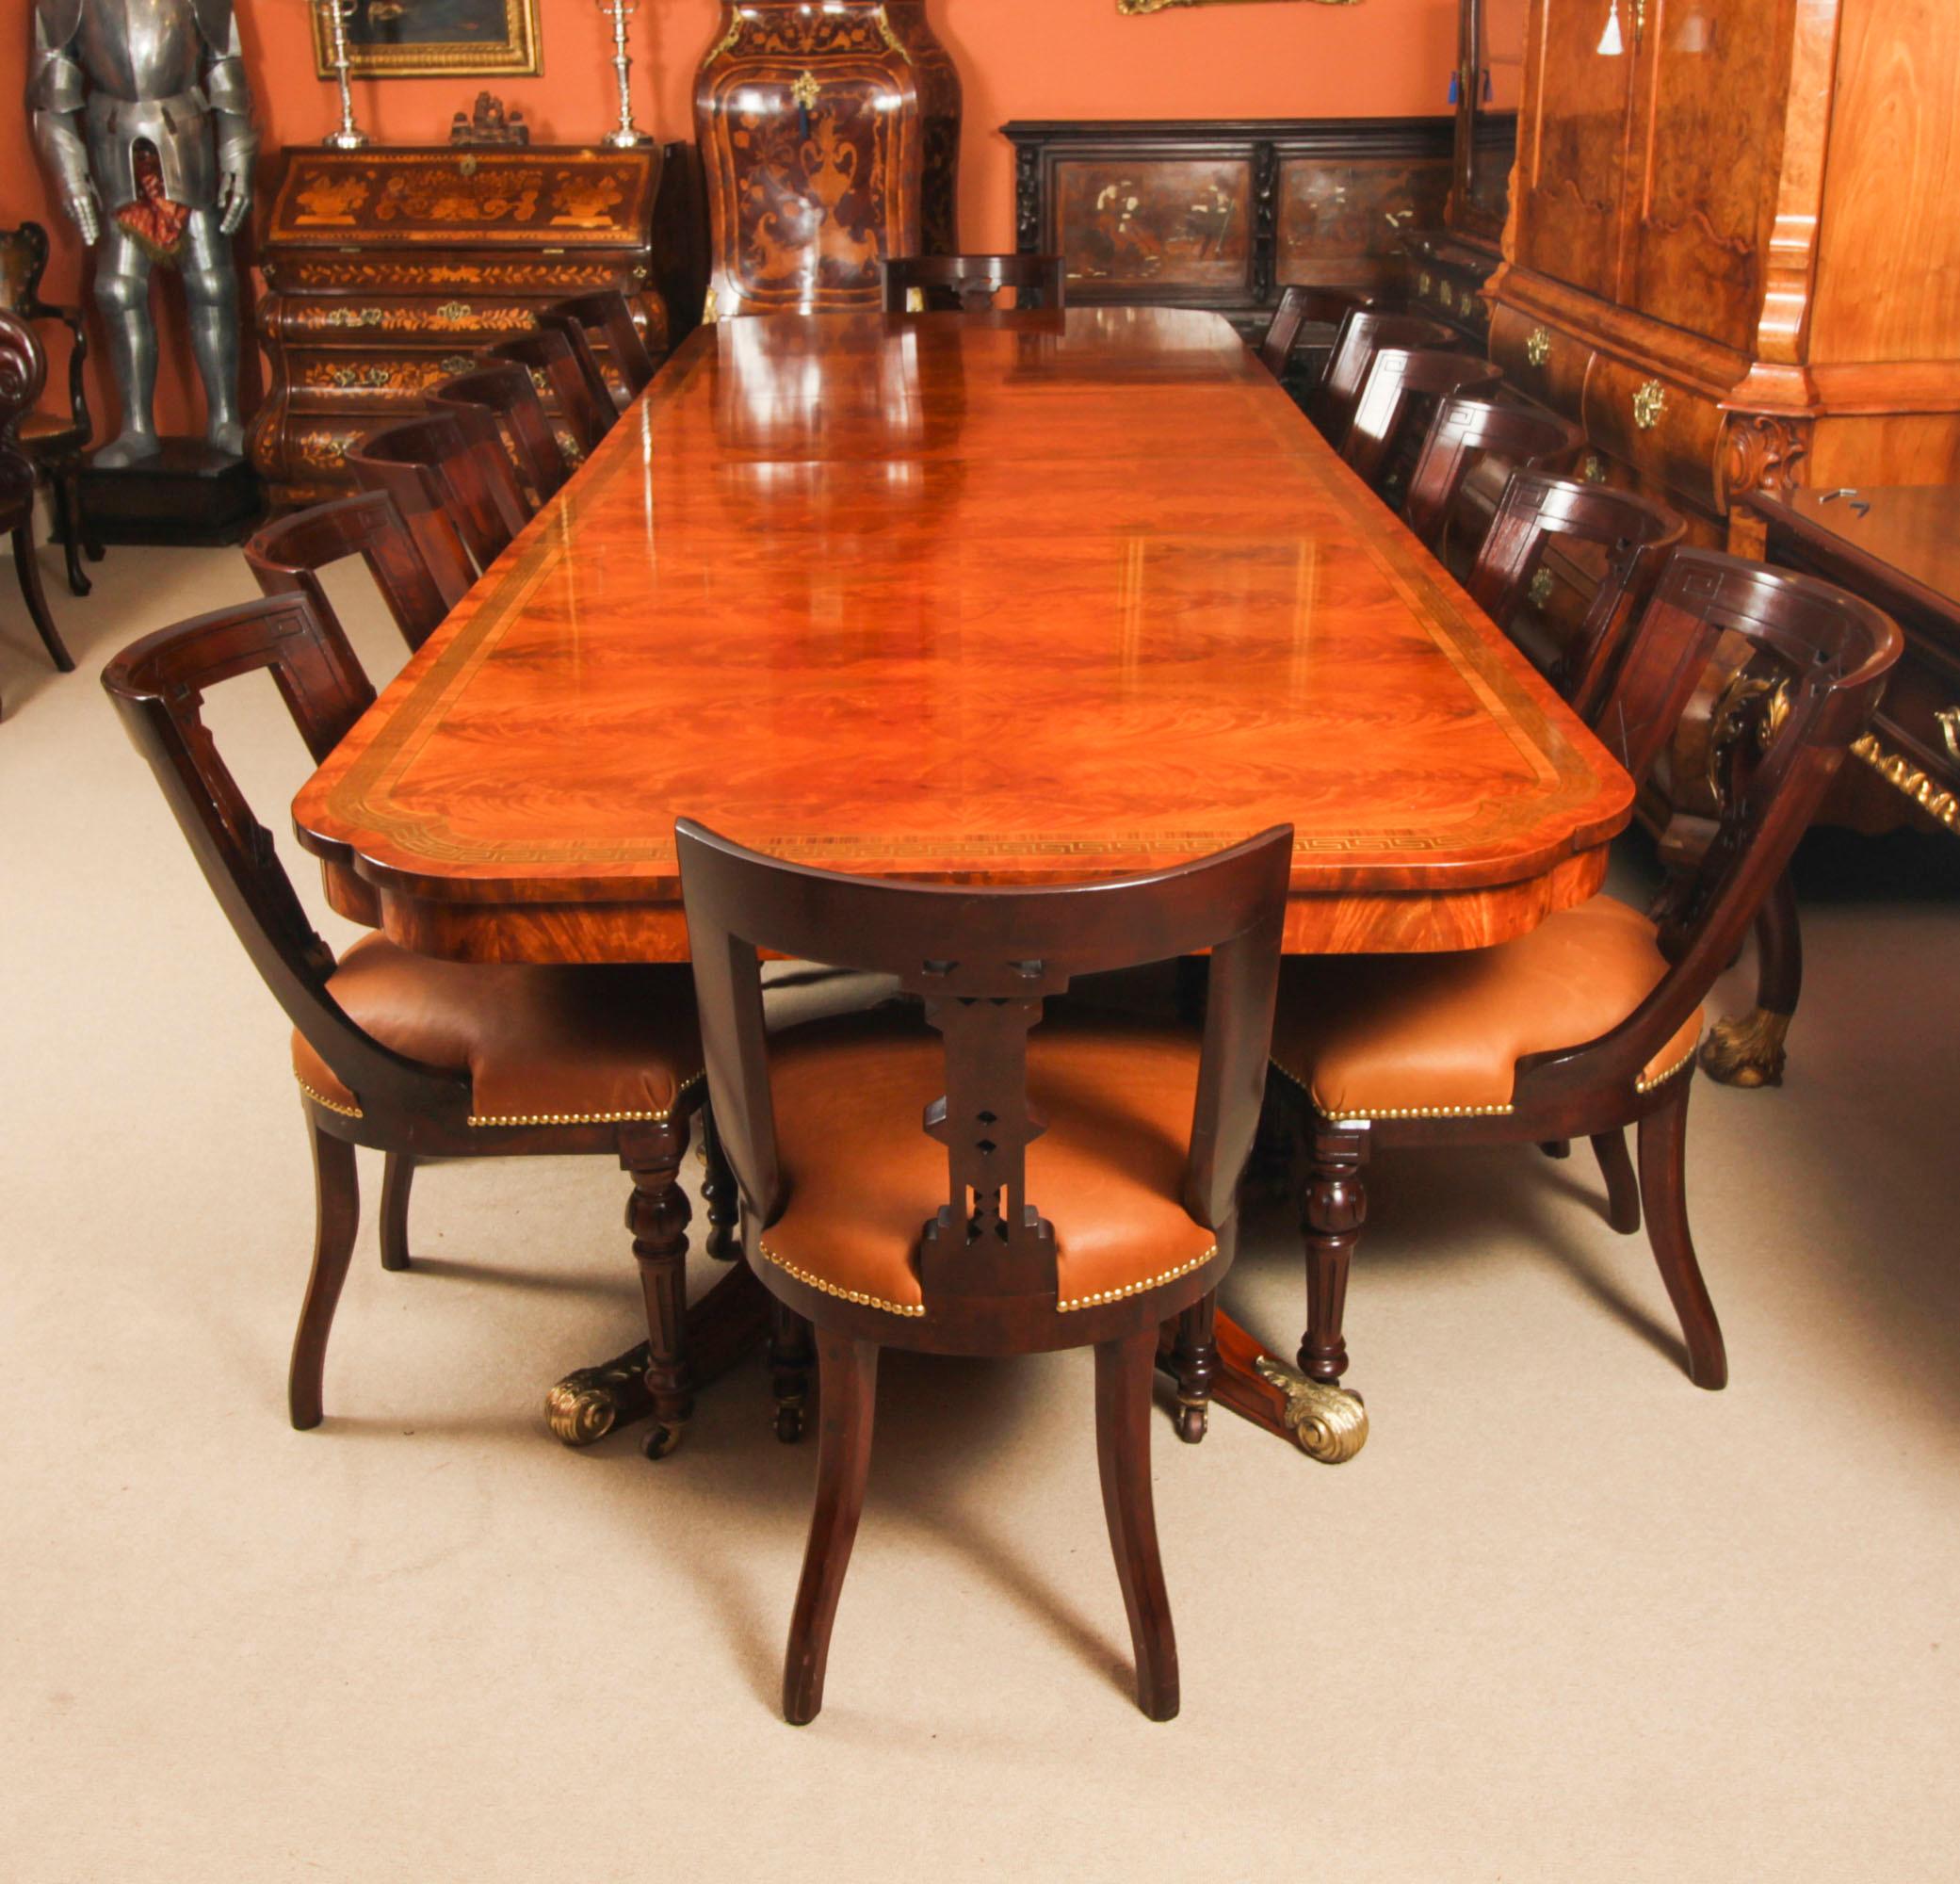 This is a fabulous Vintage Regency Revival dining set comprising a dining table, mid 20th Century in date, and a set of fourteen antique Athenian dining chairs,Circa 1870 in date.

The fabulous Vintage brass inlaid Regency Revival dining table is